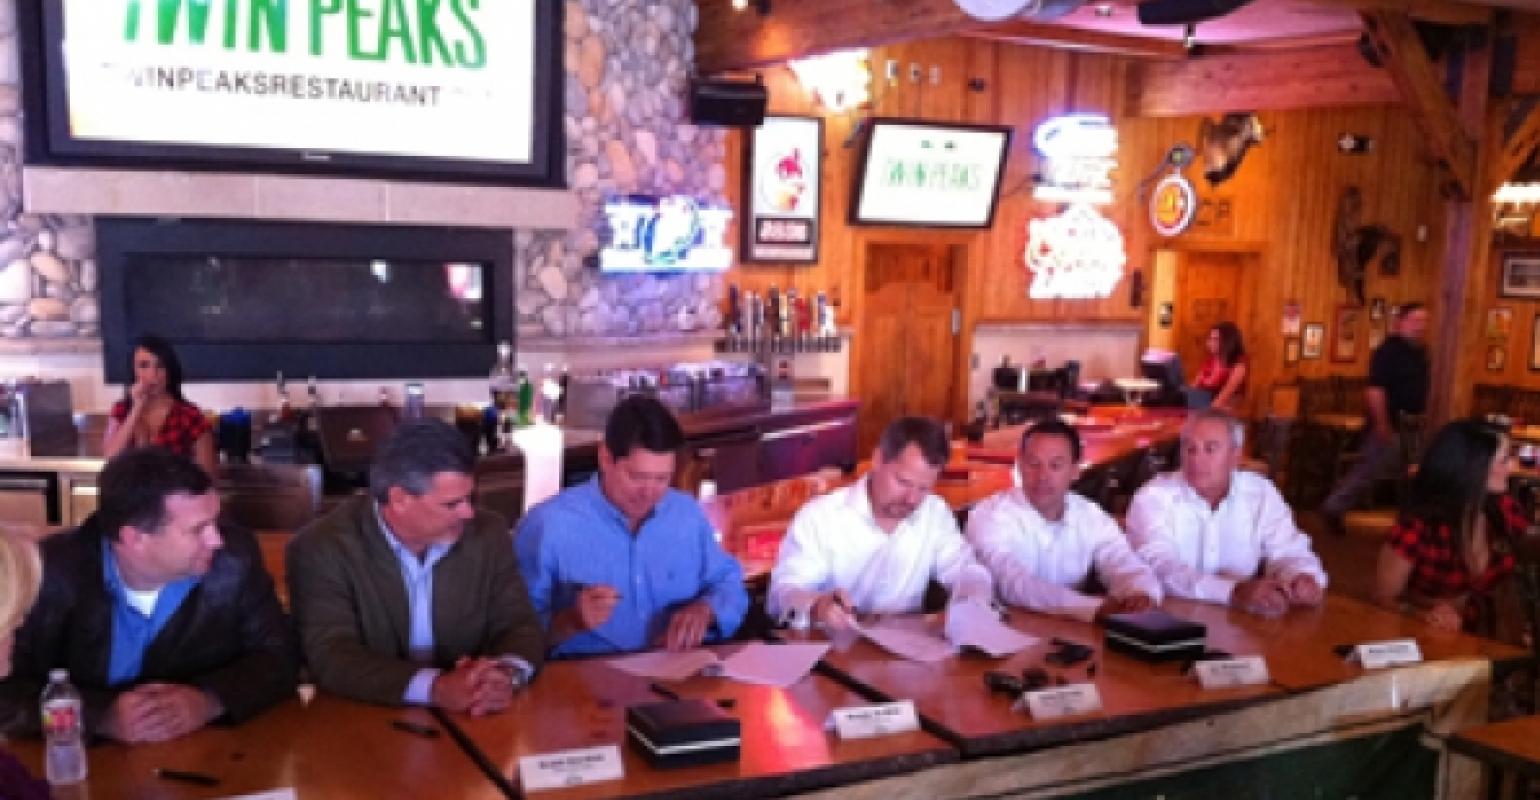 skibsbygning mad utålmodig Breastaurant' chain Twin Peaks taps Hooters execs for growth | Nation's  Restaurant News